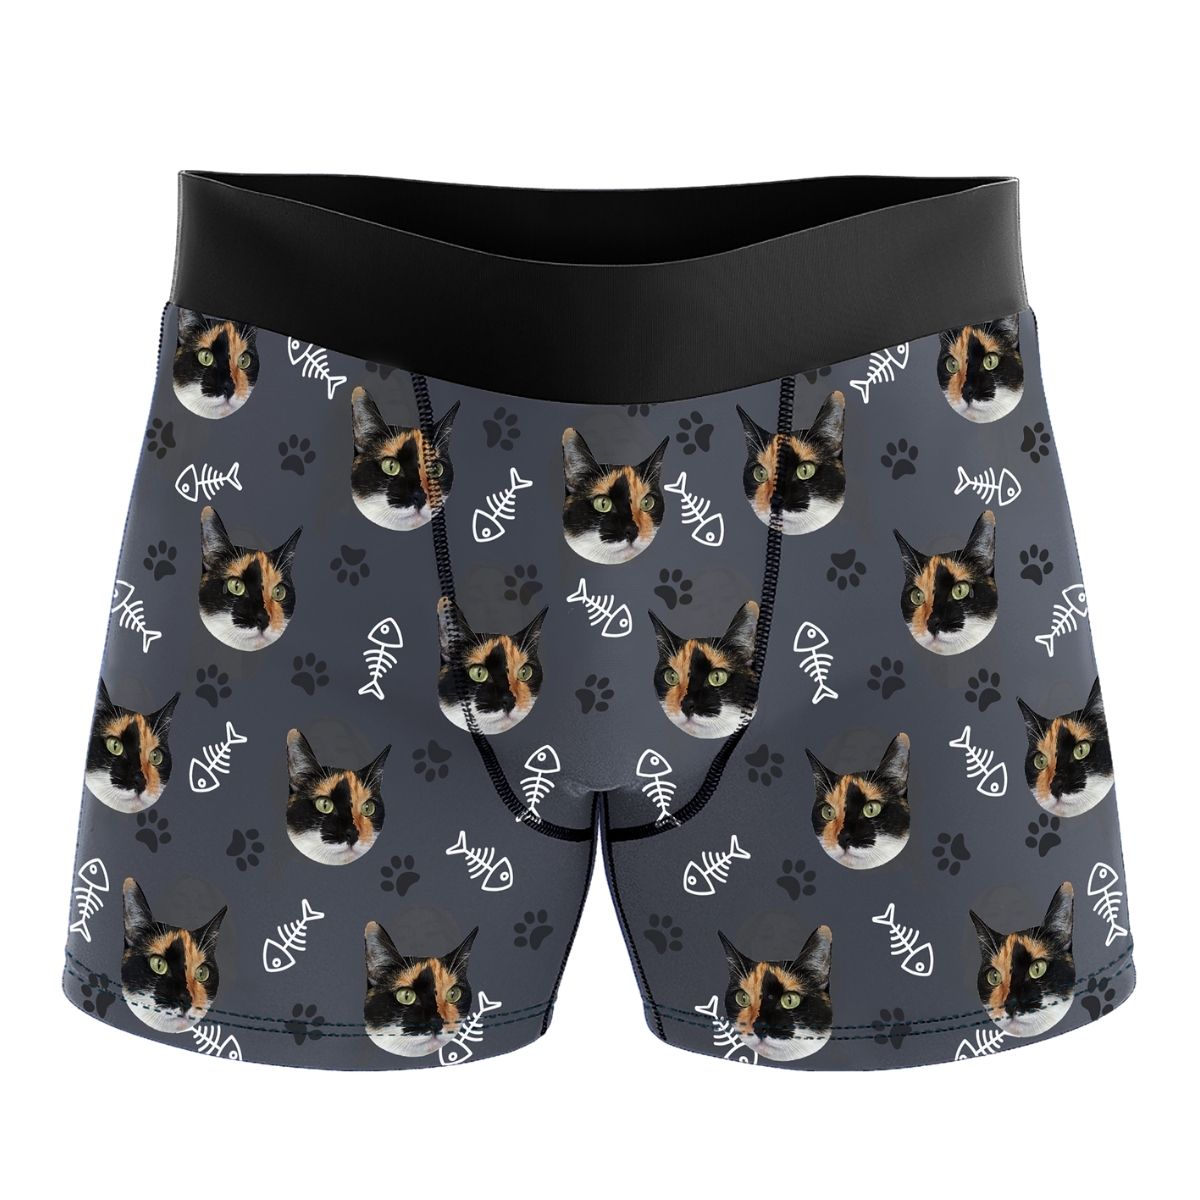 Best Custom Cat Boxers Australia  #1 Boxer Shorts with Your Cats - Pulse  Socks